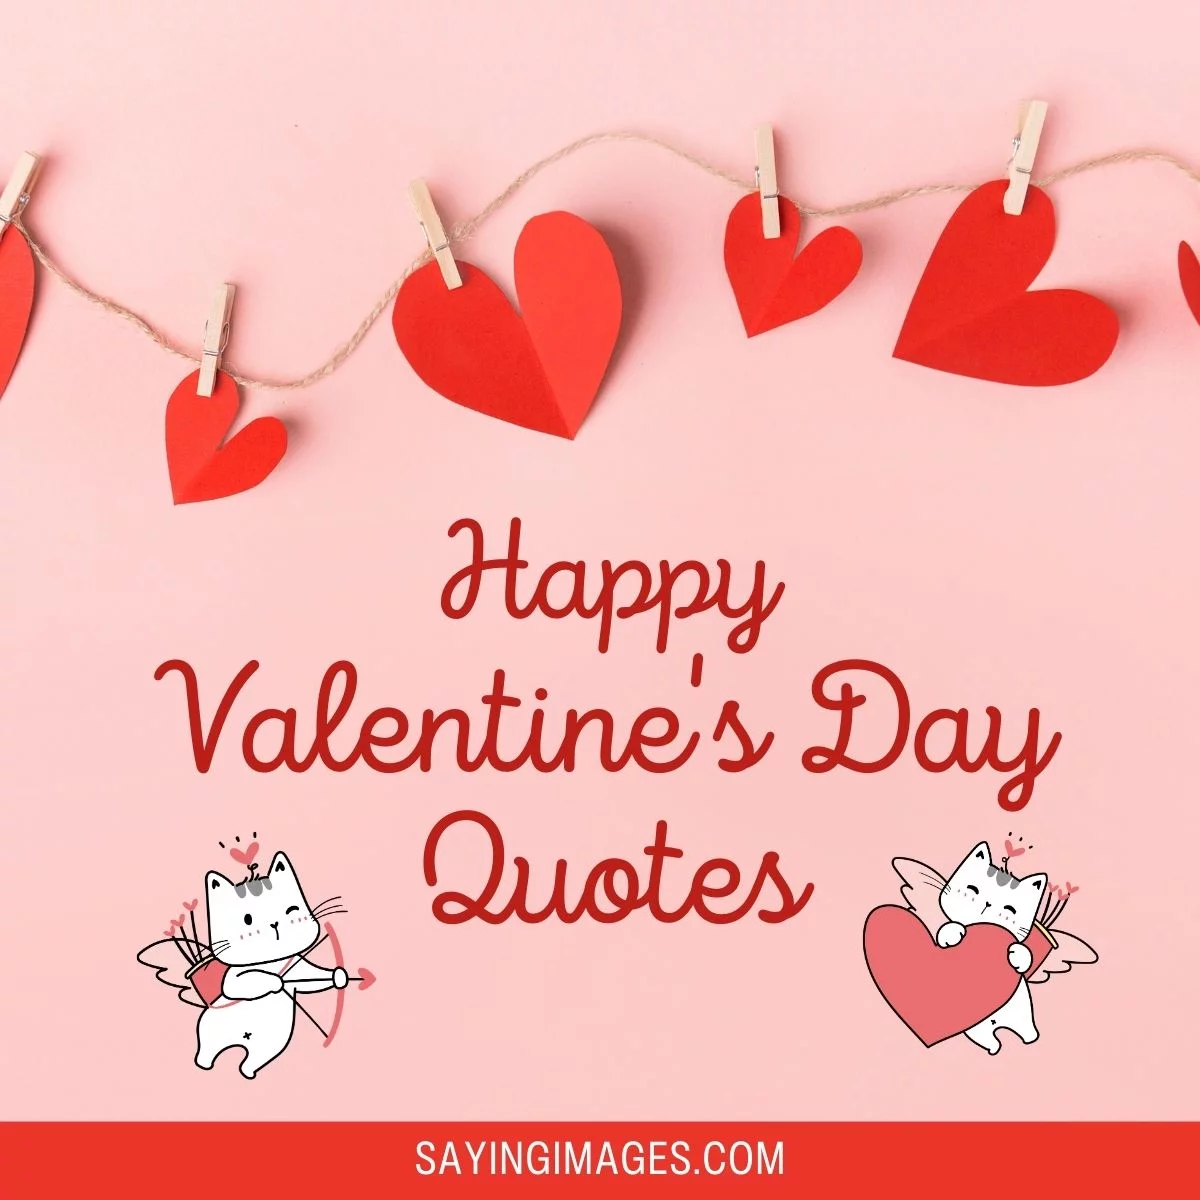 Happy Valentine’s Day Images And Quotes